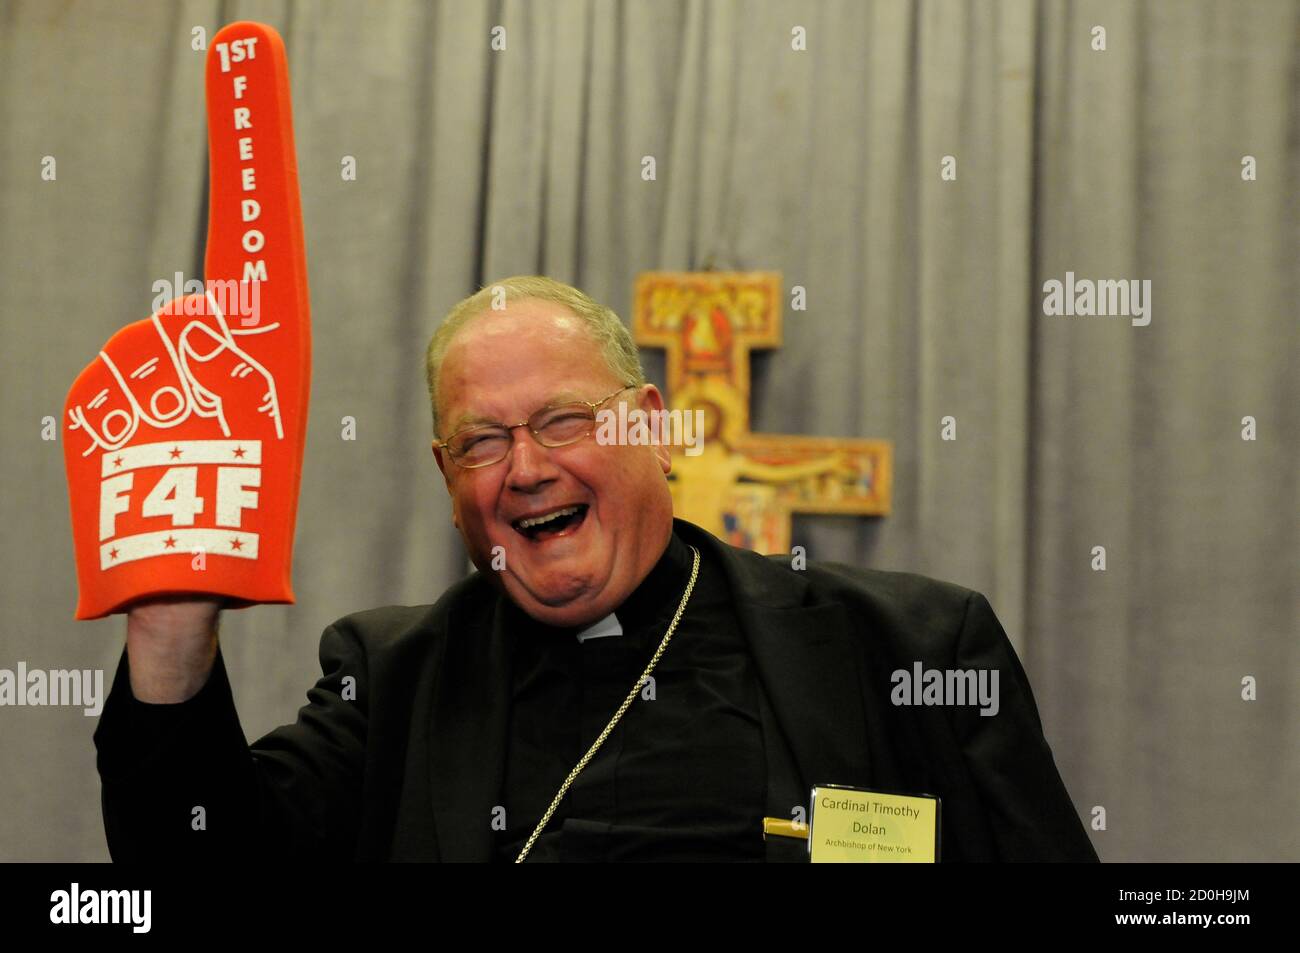 Archbishop of New York Timothy Dolan holds up a foam finger promoting 'A Fortnight for Freedom' conference sponsored by the Catholic church following a afternoon session during the U.S. Conference of Catholic Bishops Annual Spring Assembly in Atlanta, Georgia, June 13, 2012. REUTERS/Tami Chappell (UNITED STATES) BEST QUALITY IMAGE Stock Photo